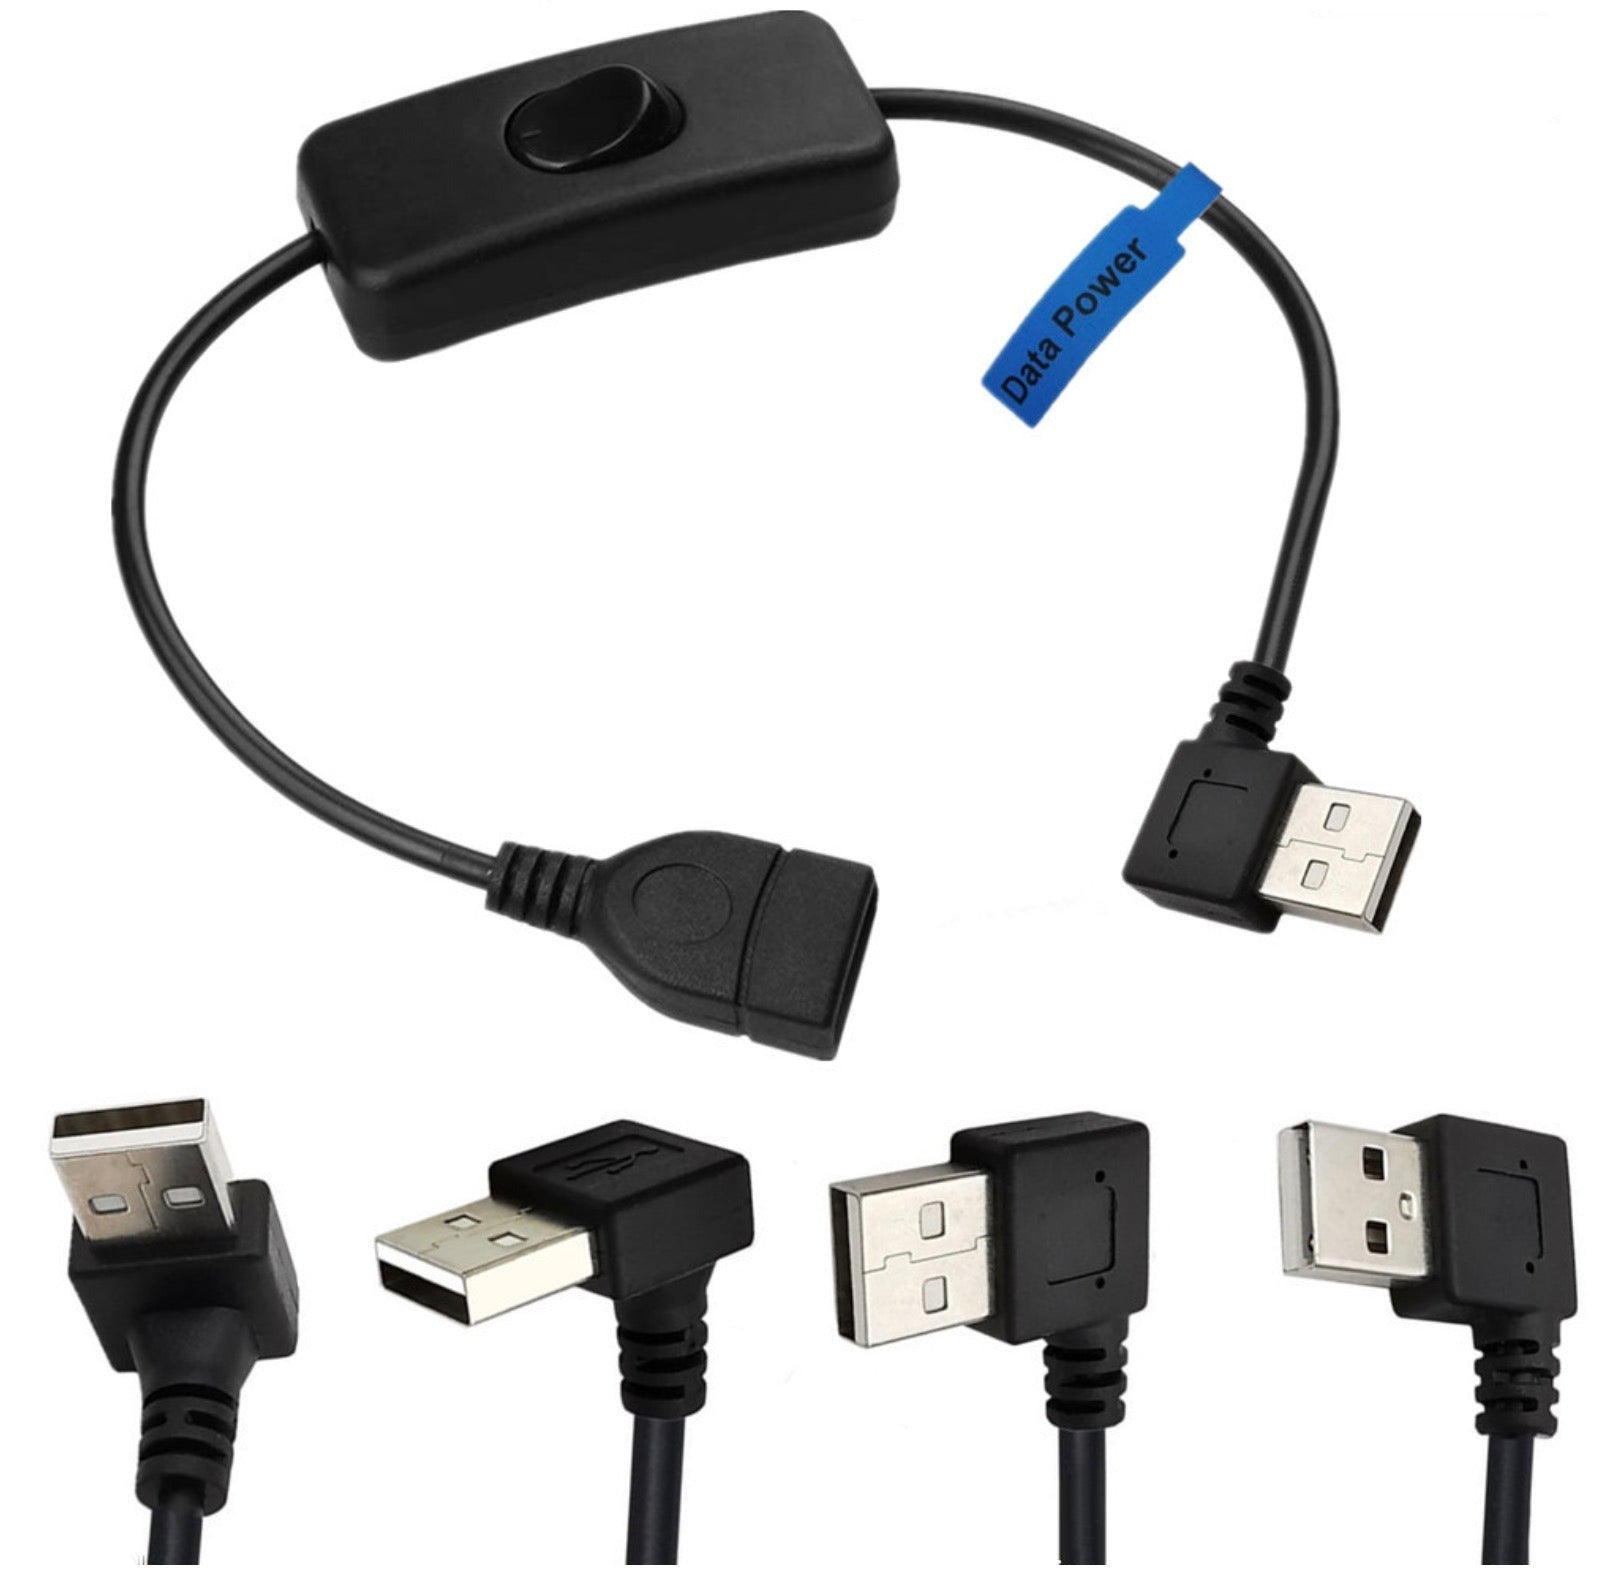 USB 2.0 A Male to Female Data Charging Extension Cable with On/Off Switch